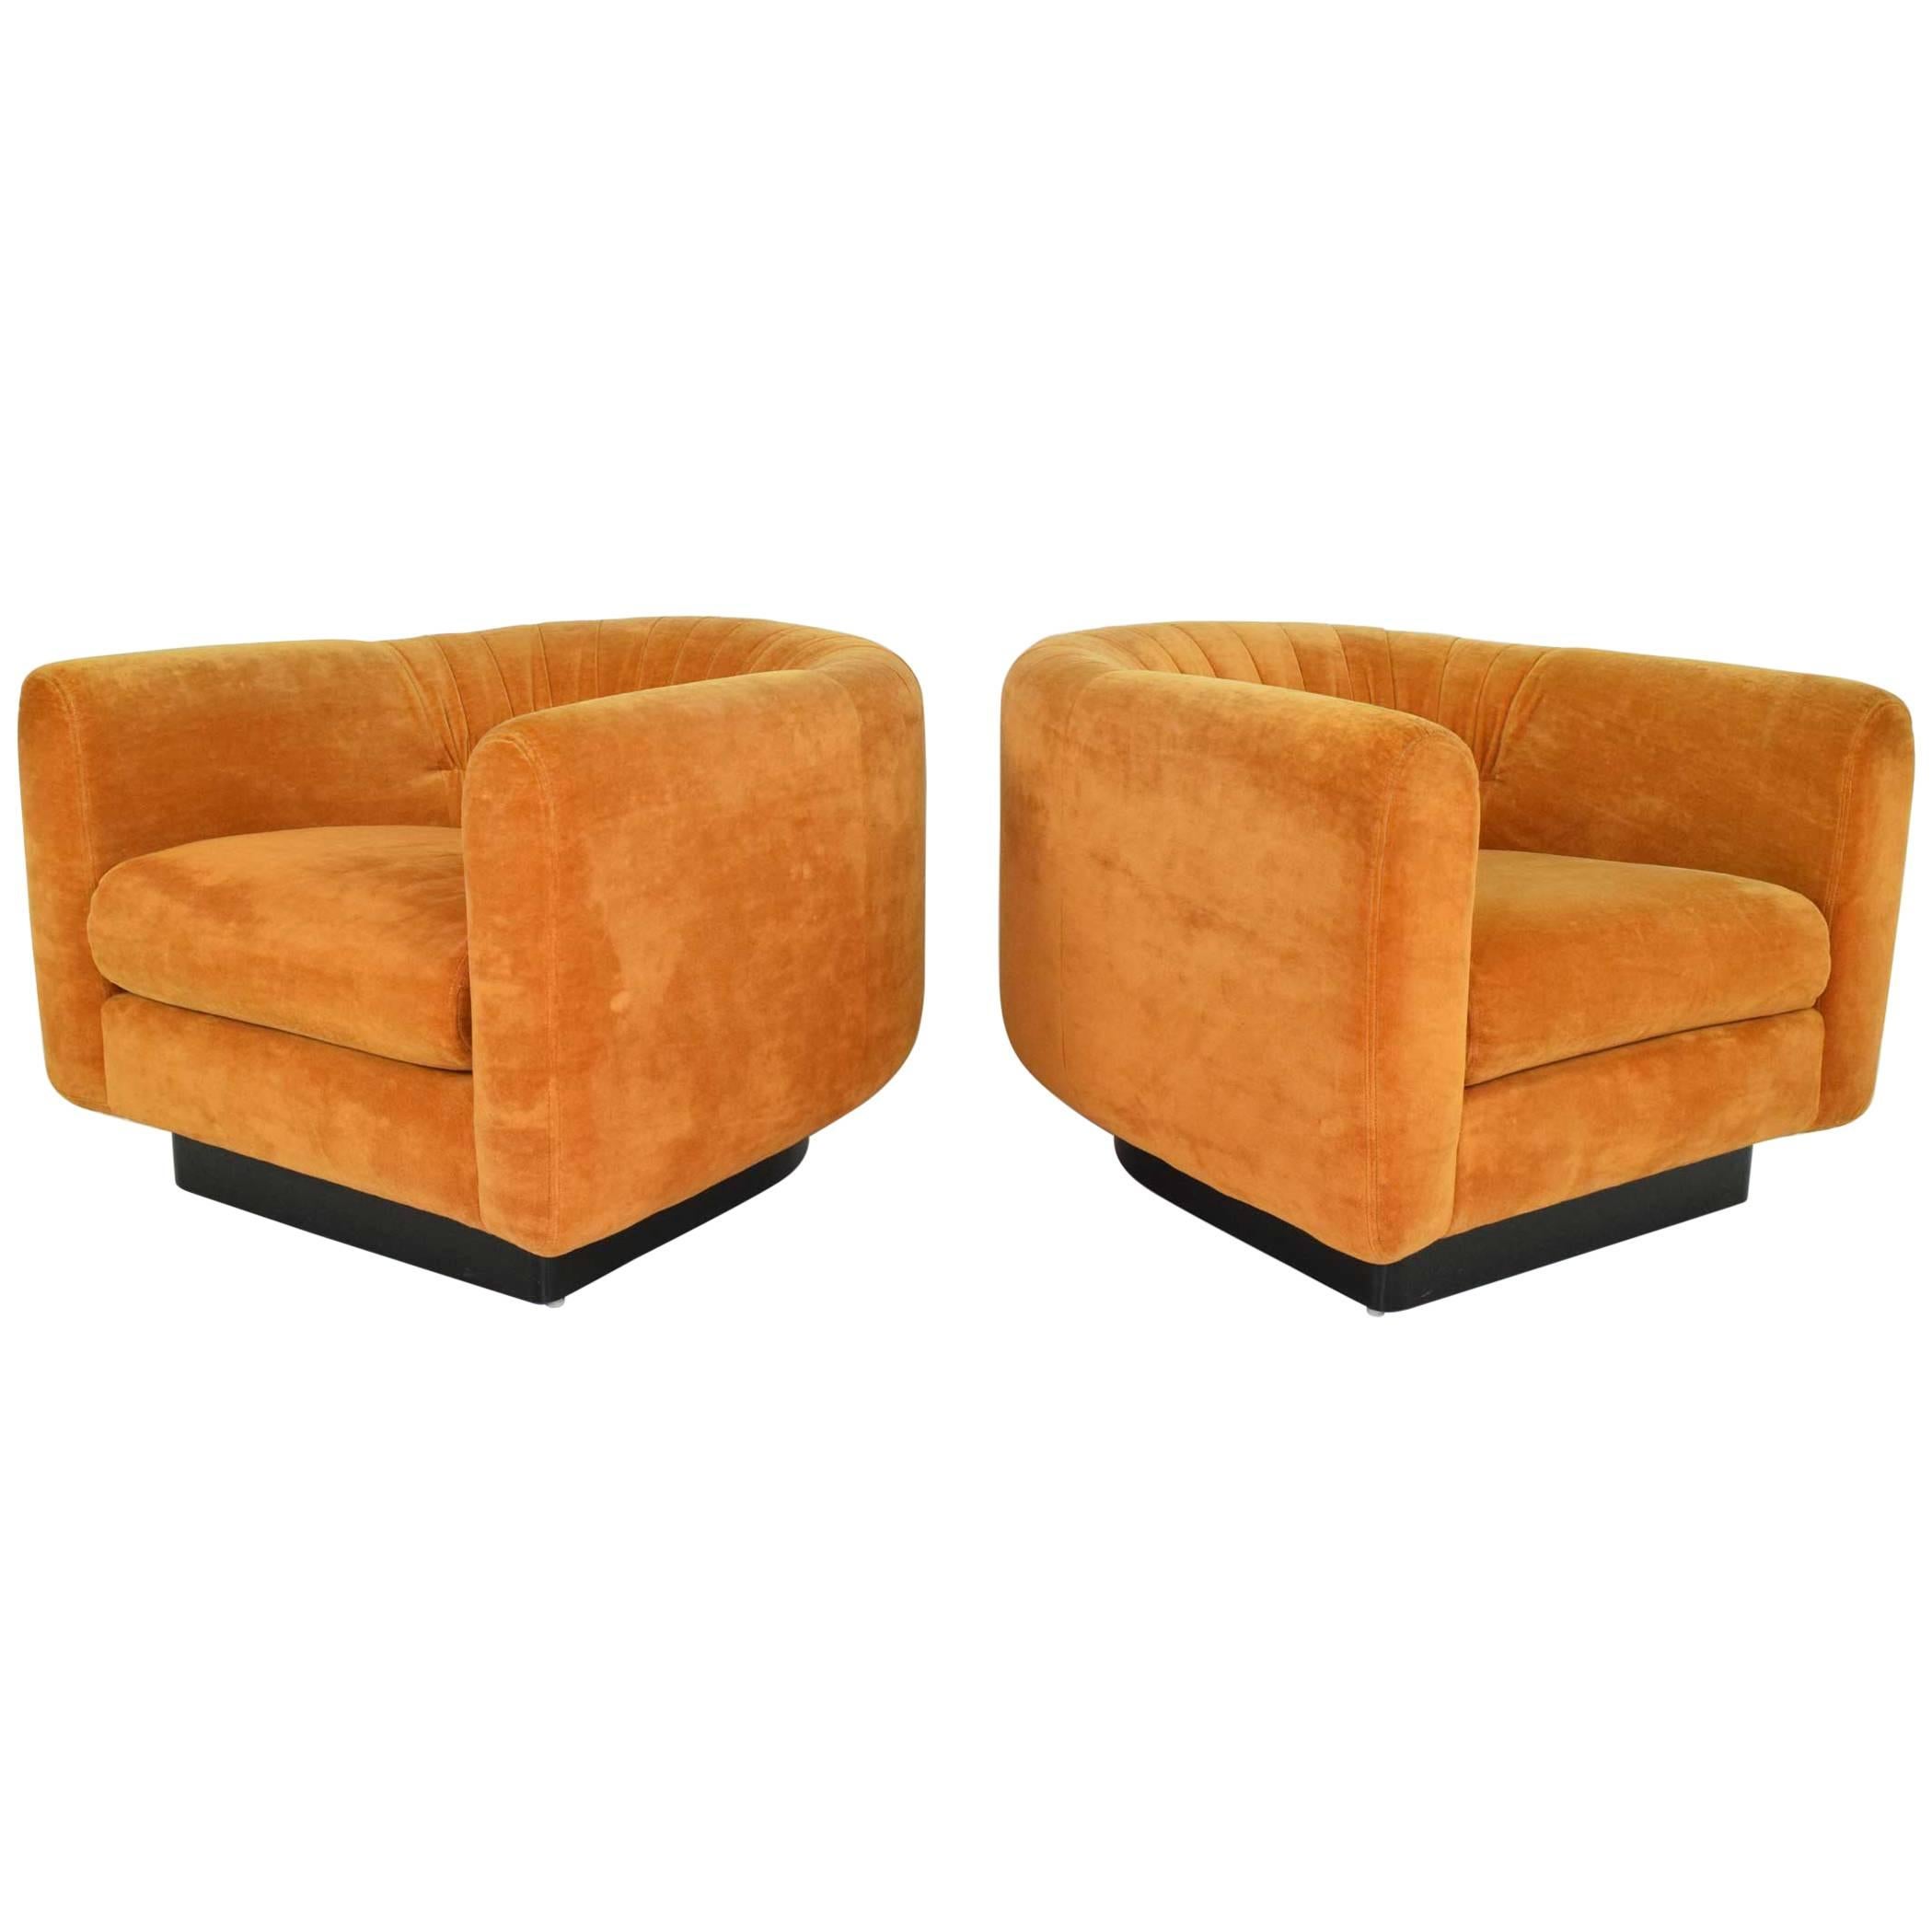 Pair of Milo Baughman style Lounge Chairs by Metropolitan Furniture Company